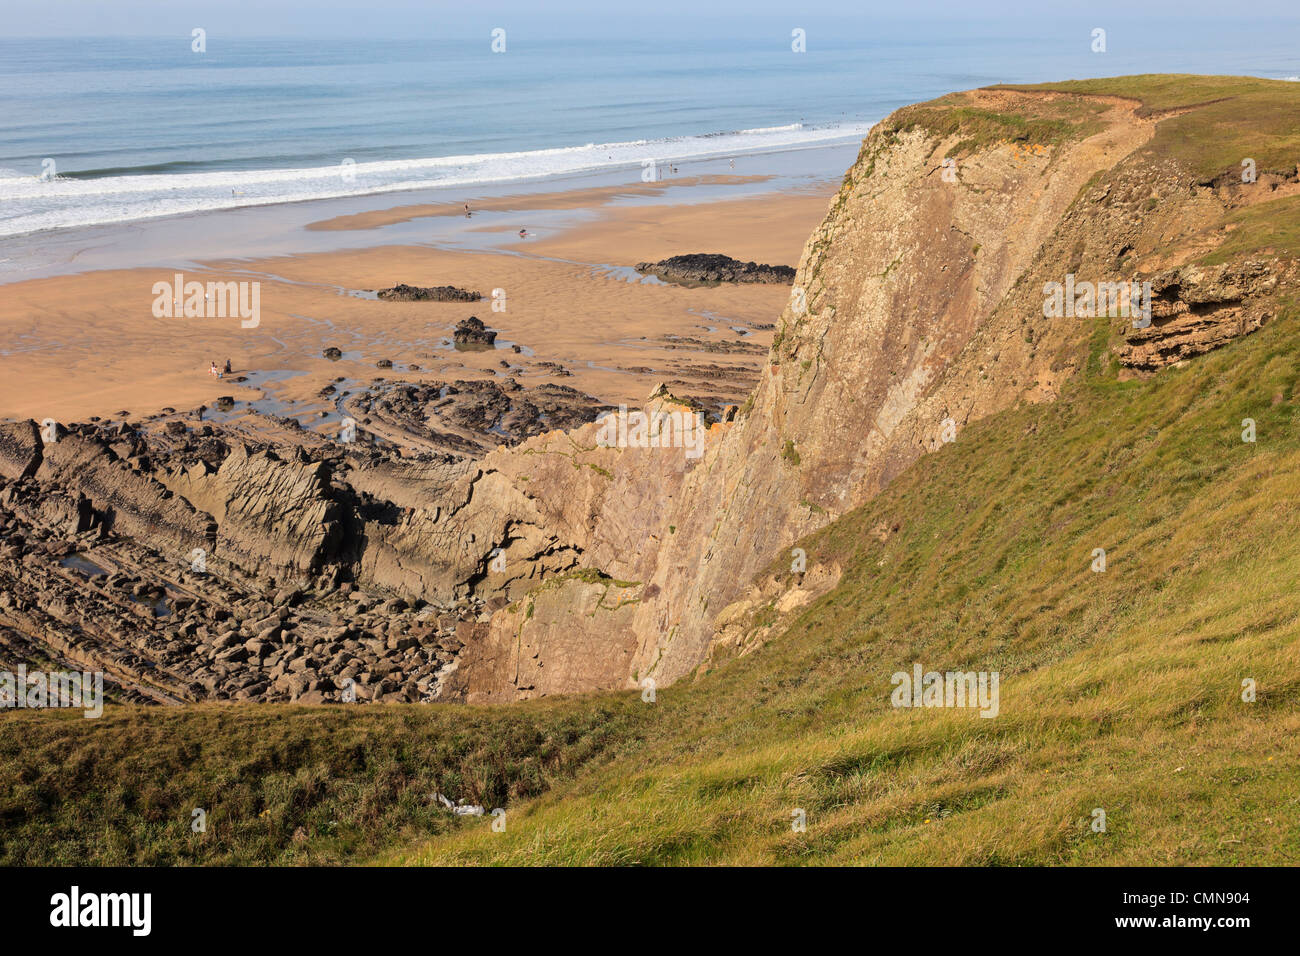 Vertical beds of Carboniferous sandstone cliffs above the beach on Cornish coast in Bude Bay, North Cornwall, England, UK Stock Photo